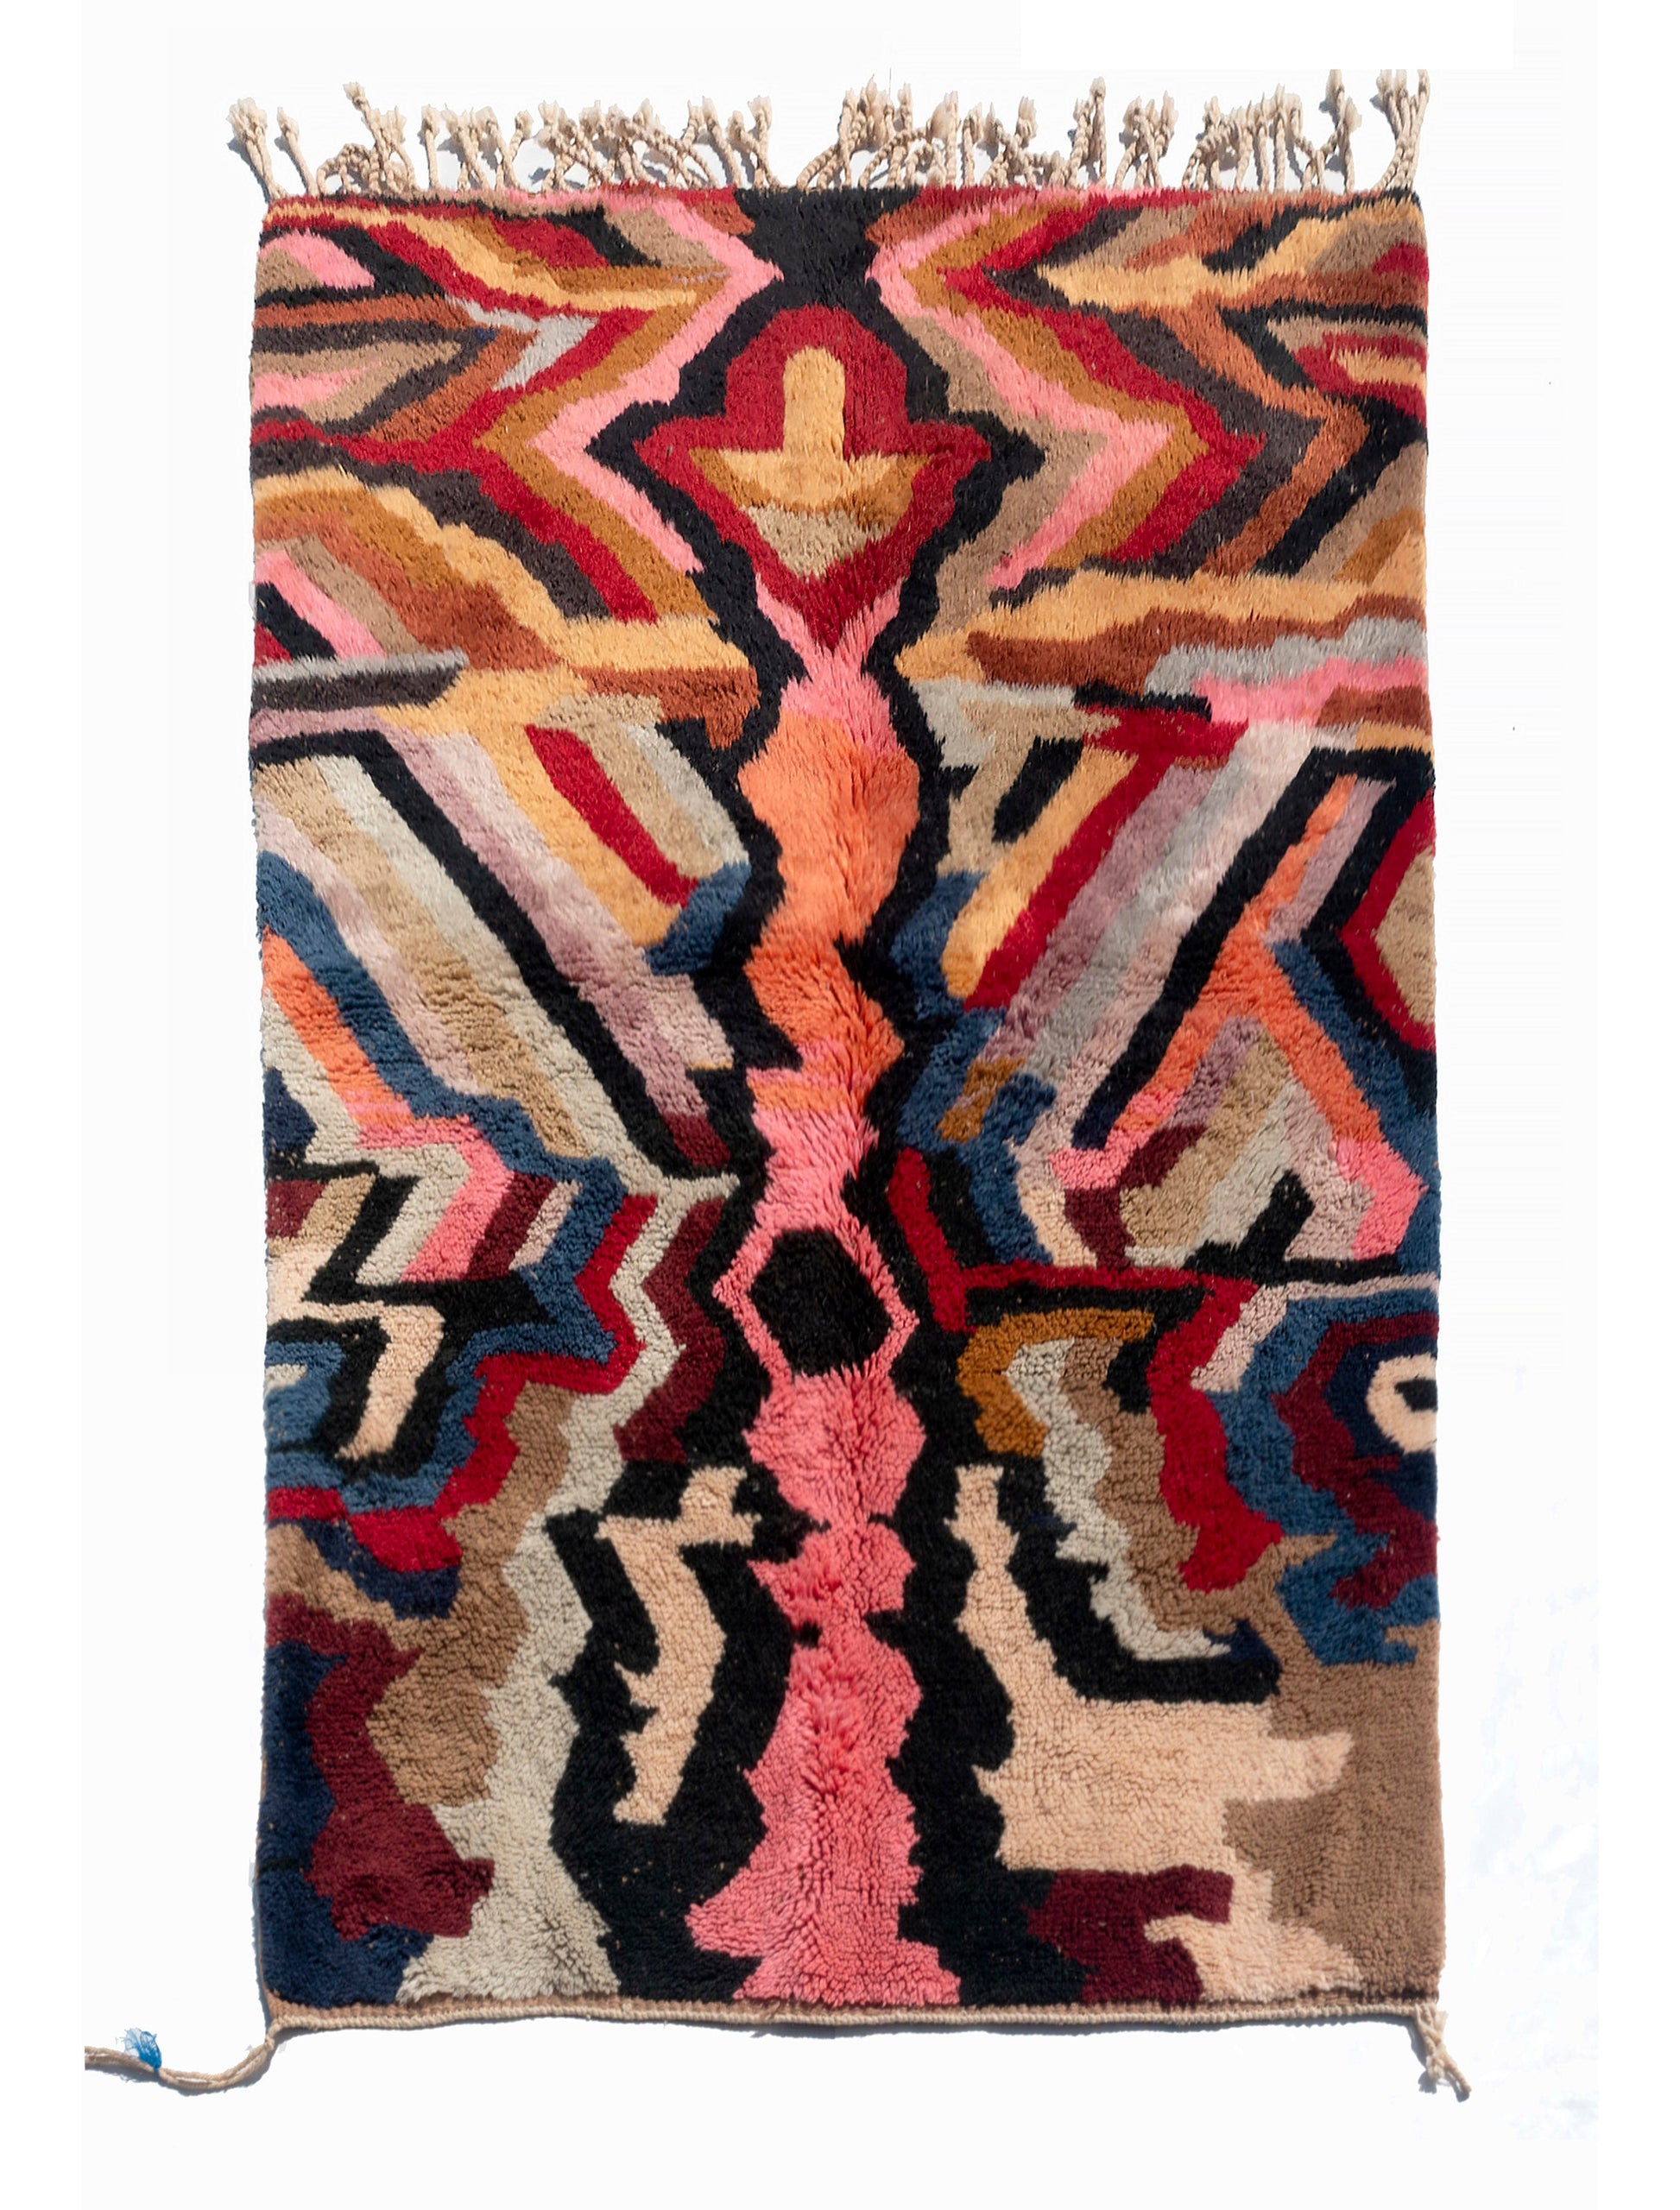 moroccanrugs,
carpets,
rugs,
area rugs,
ruggable rugs,
outdoor rugs,
wayfair rugs,
carpet stores near me,
home depot carpet installation,
living room rugs,
revival rugs,
kitchen rugs,
9x12 area rugs,
8x10 rug,